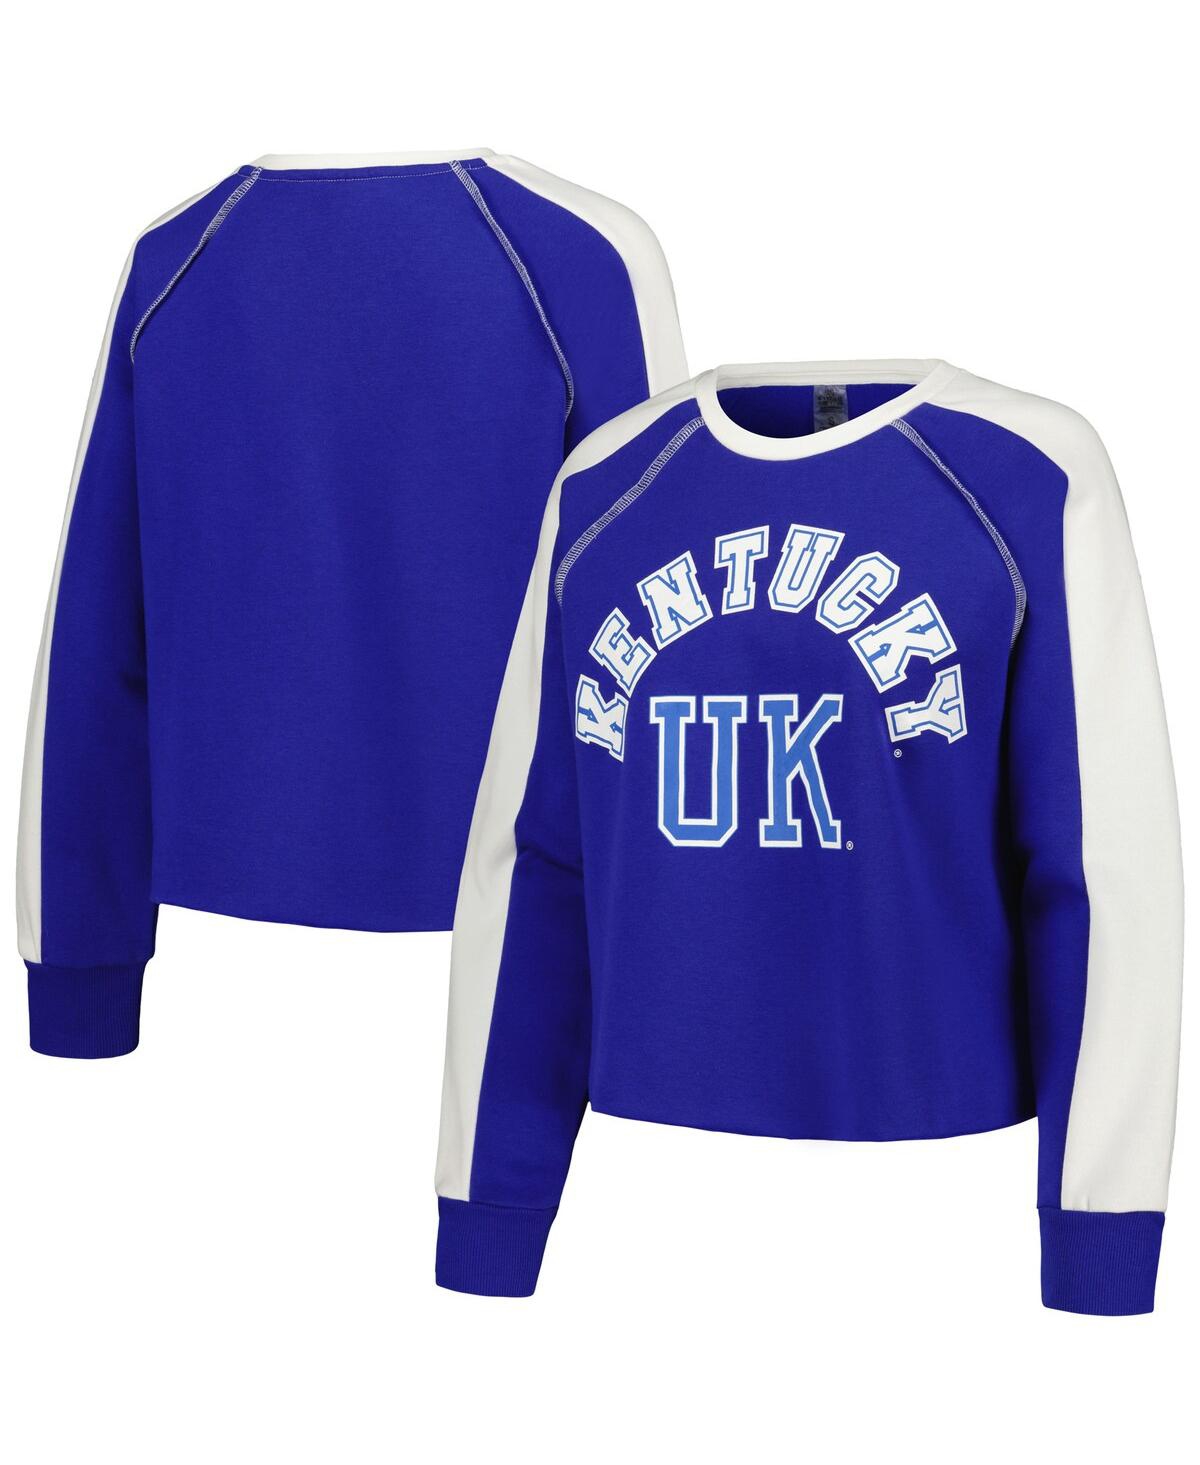 Women's Gameday Couture Royal Kentucky Wildcats Blindside RaglanÂ Cropped Pullover Sweatshirt - Royal